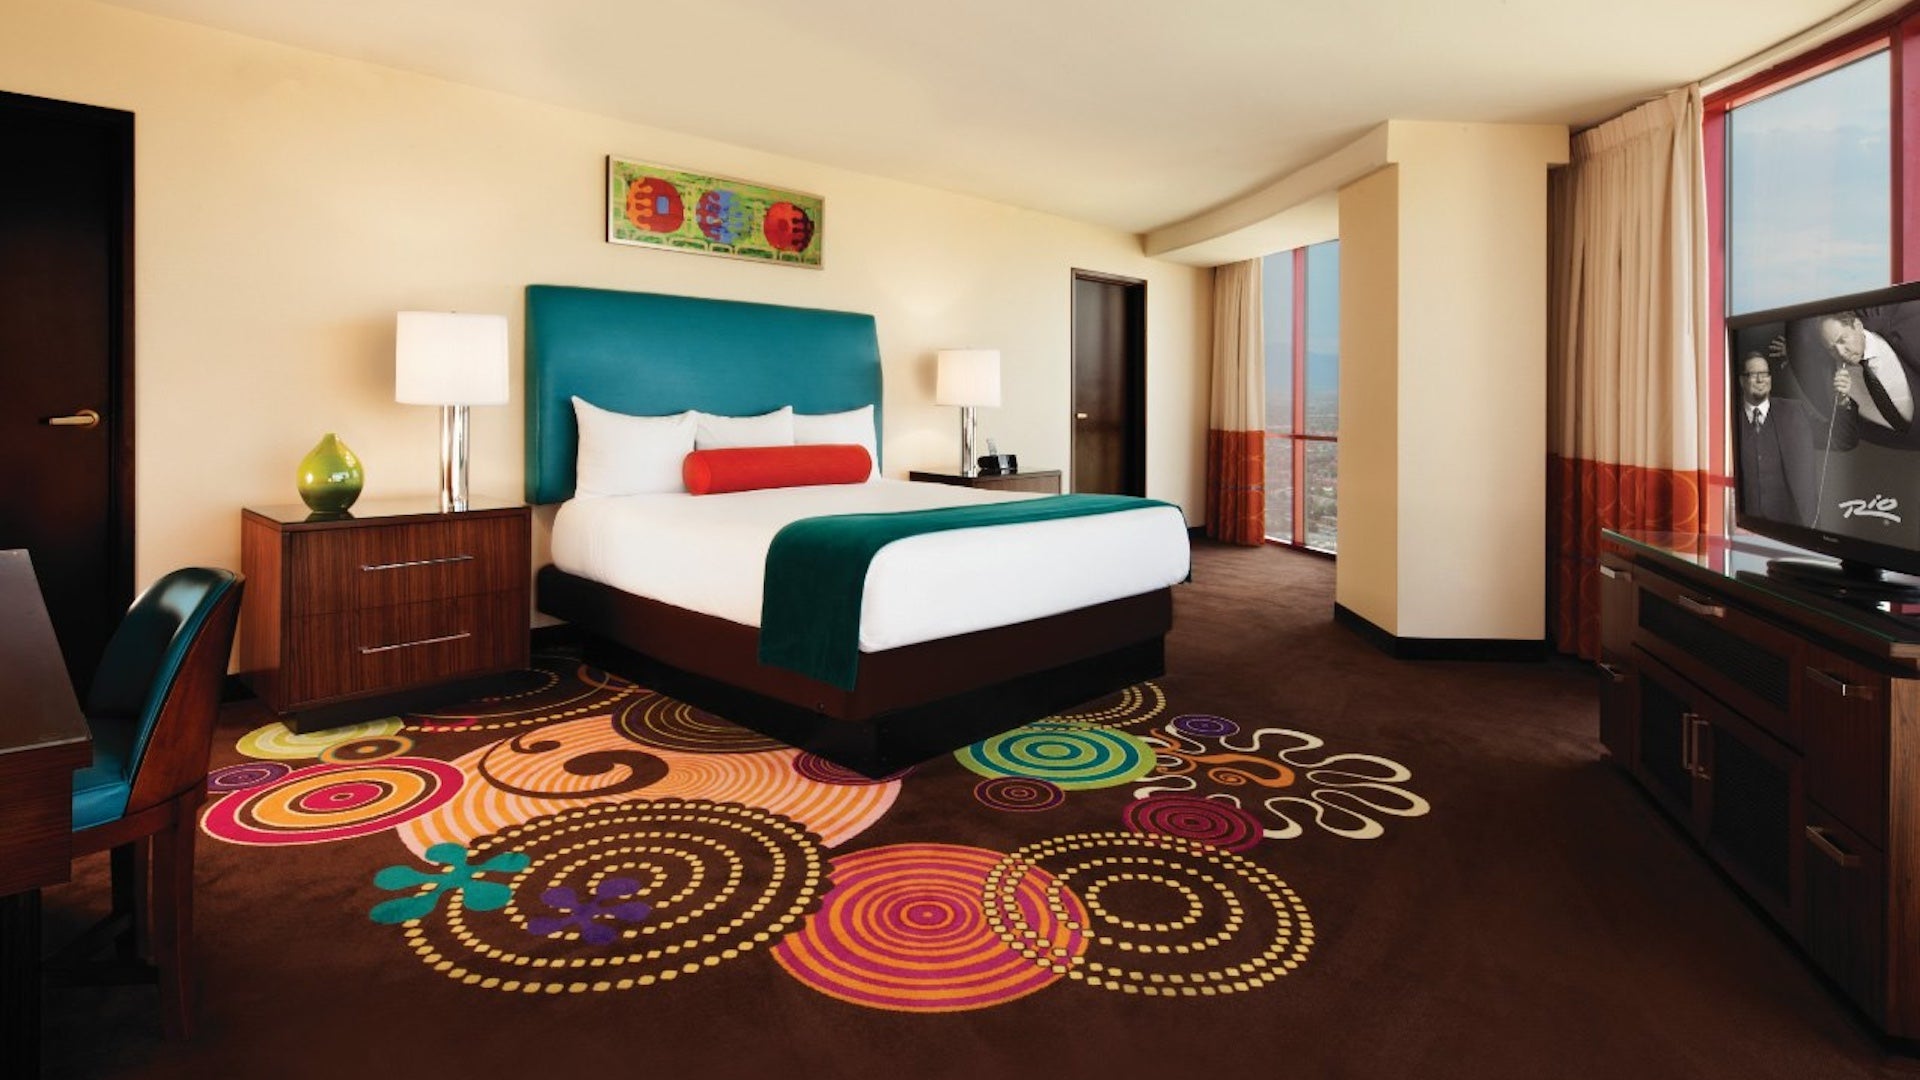 hotel room with a white and teal bed and chocolate floors with colorful swirls